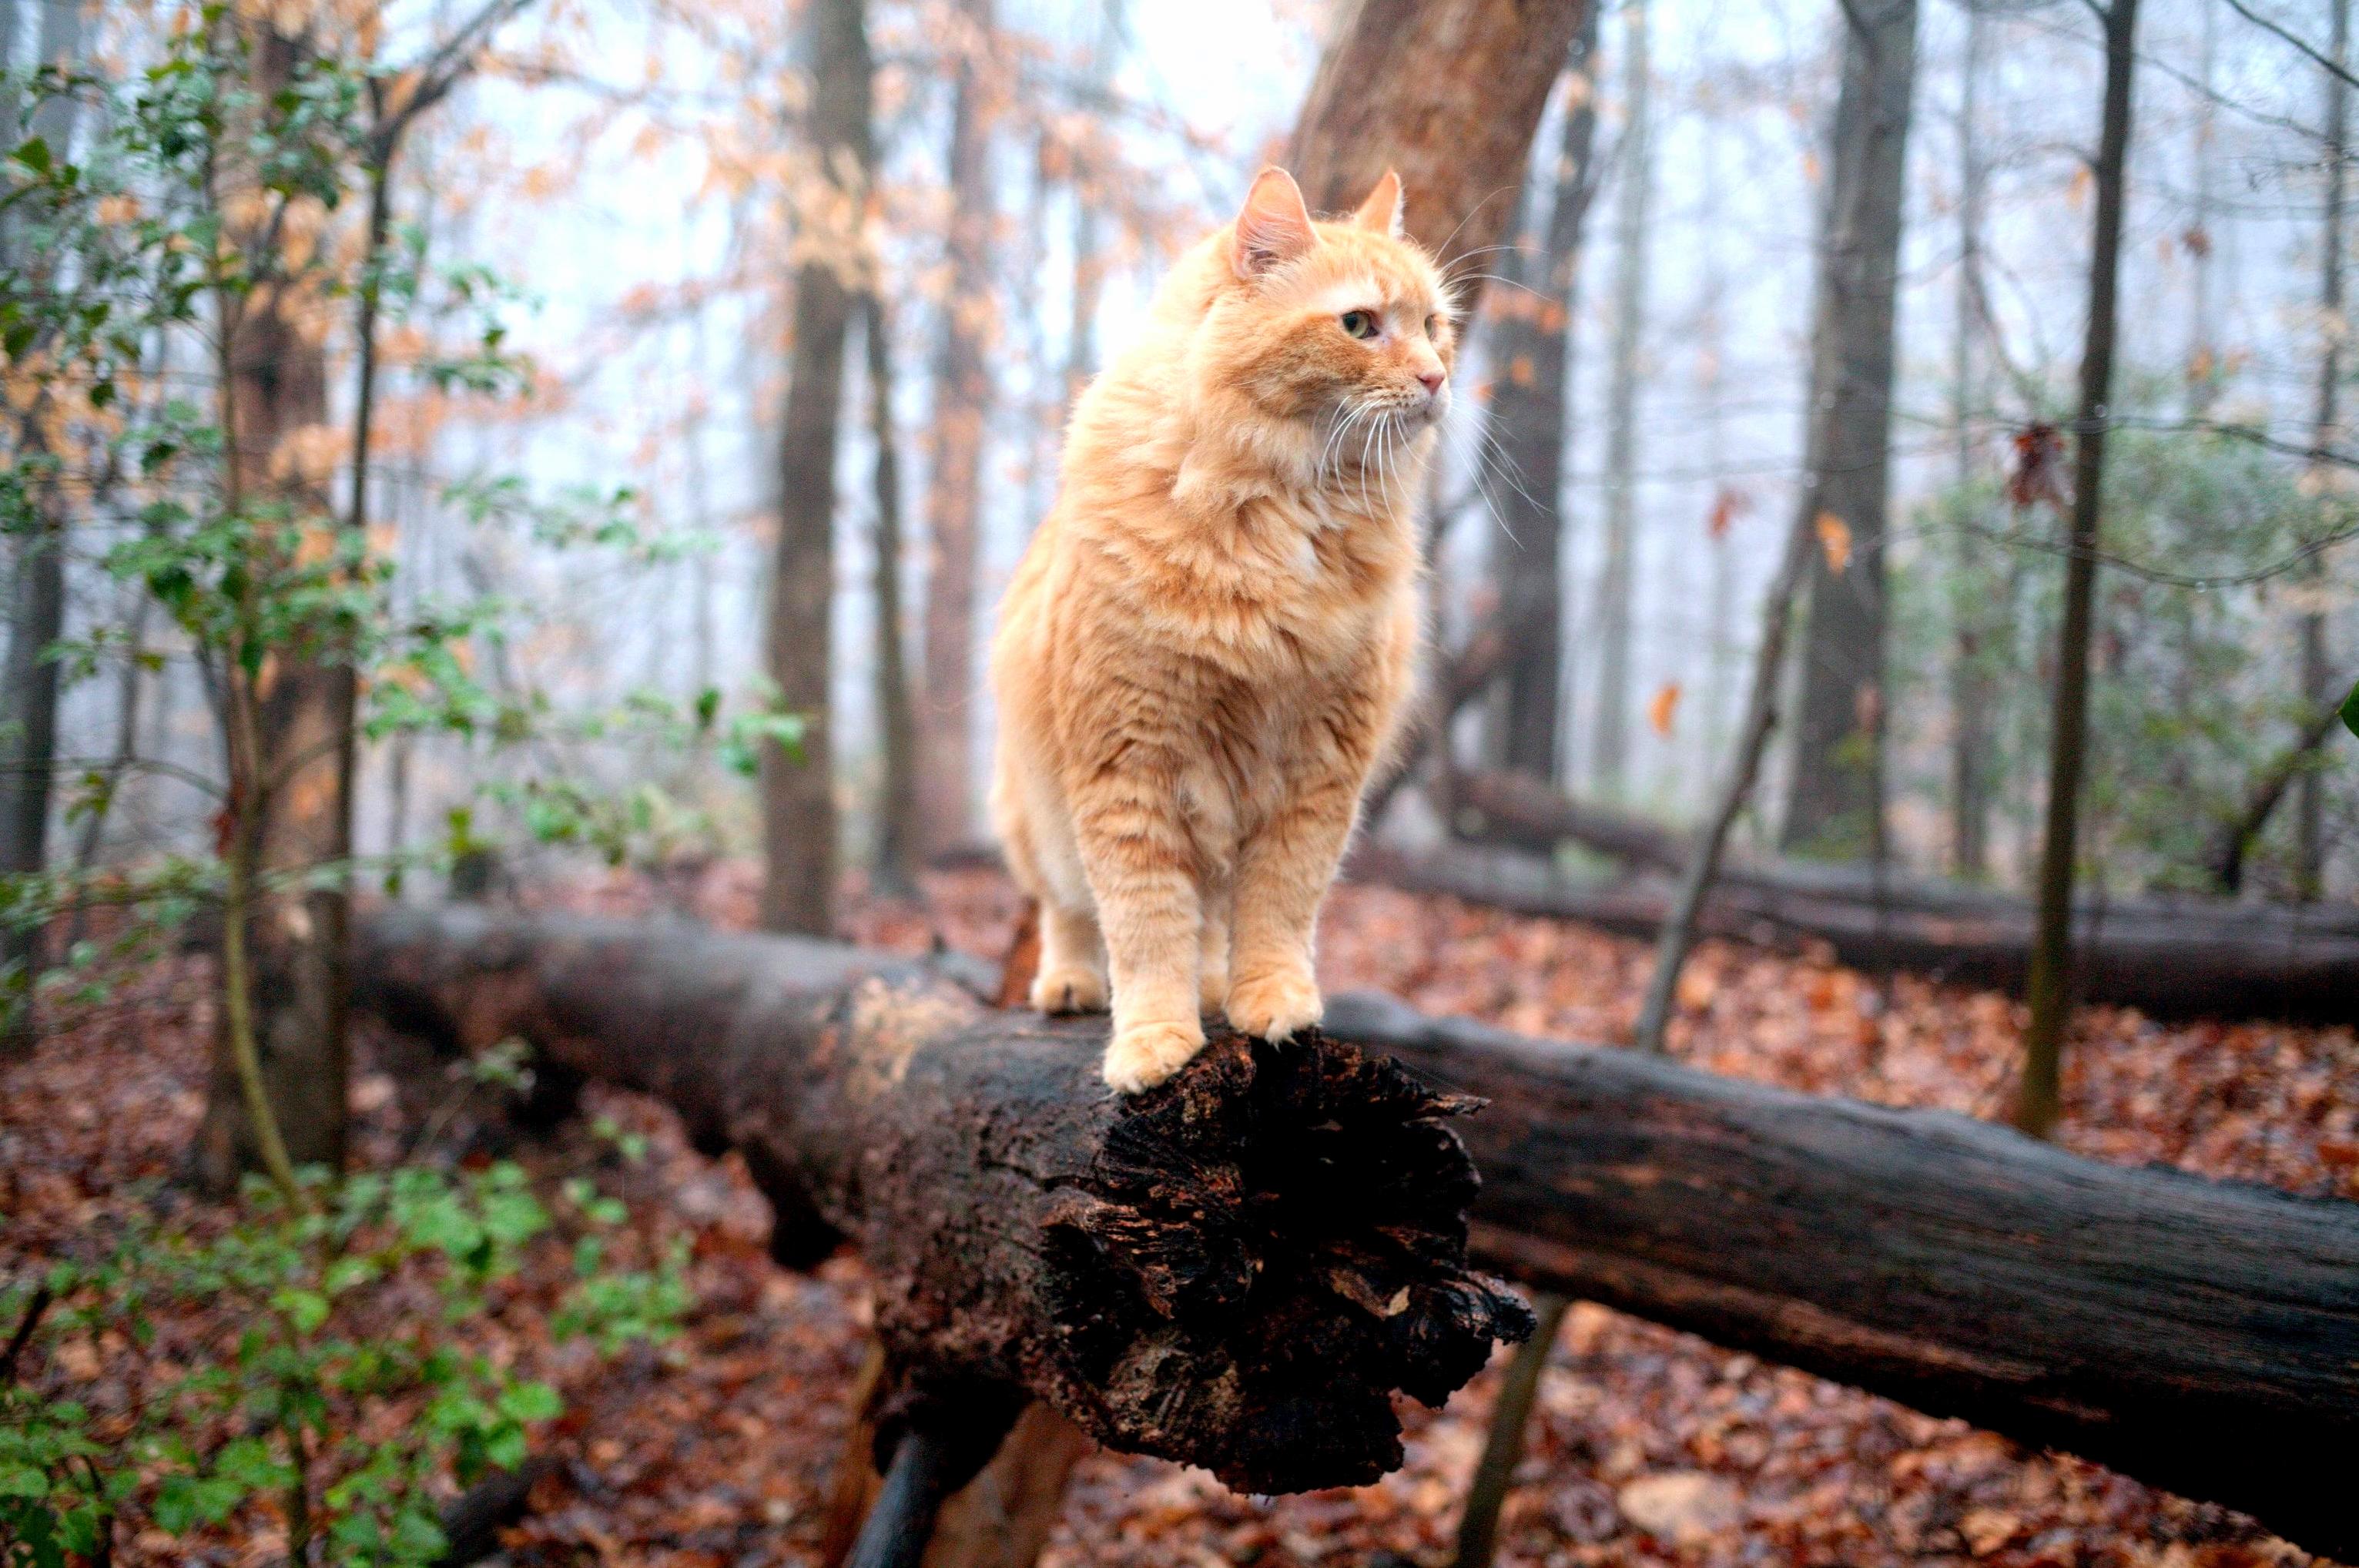 Mookie in his natural habitat. this guy loves walking on fallen trees more than anything